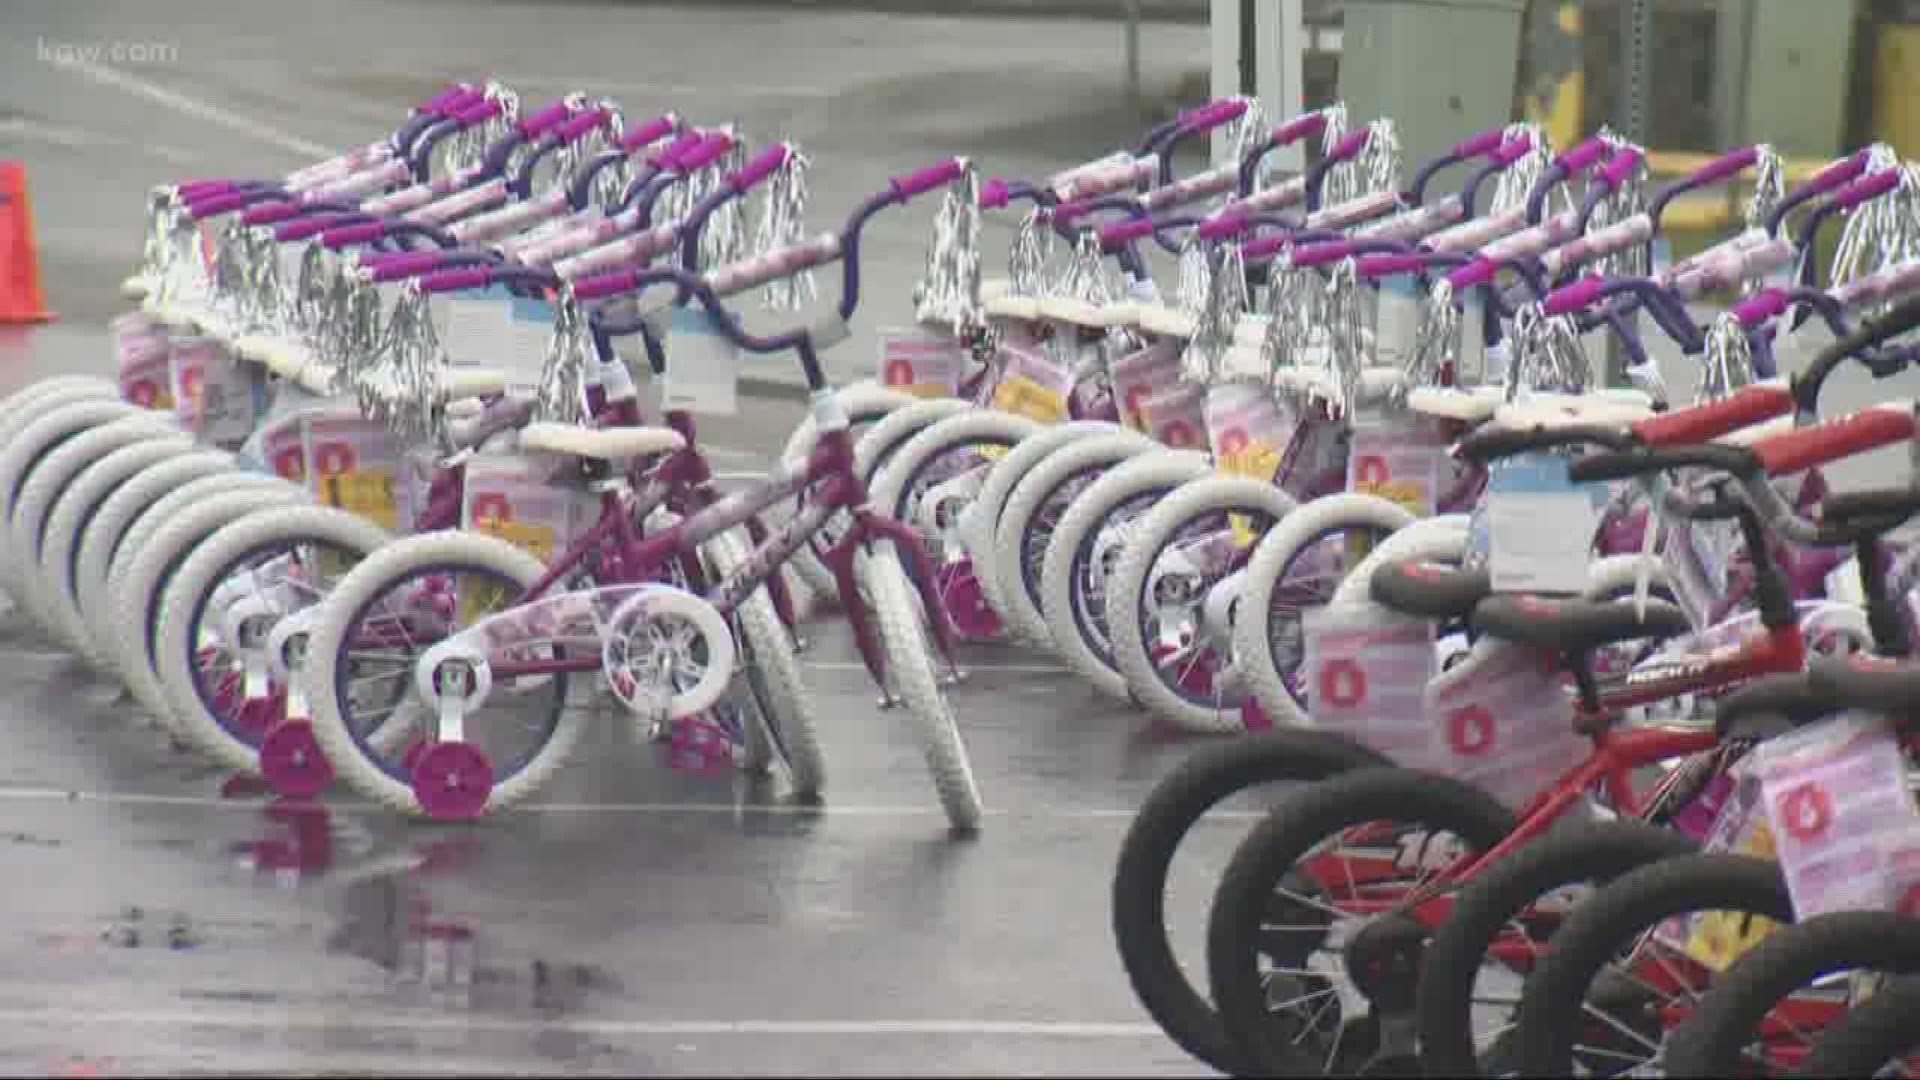 More than 150 kids in the Portland area foster care system got new bikes just in time for the holidays. The gift also highlights the need for foster parents.